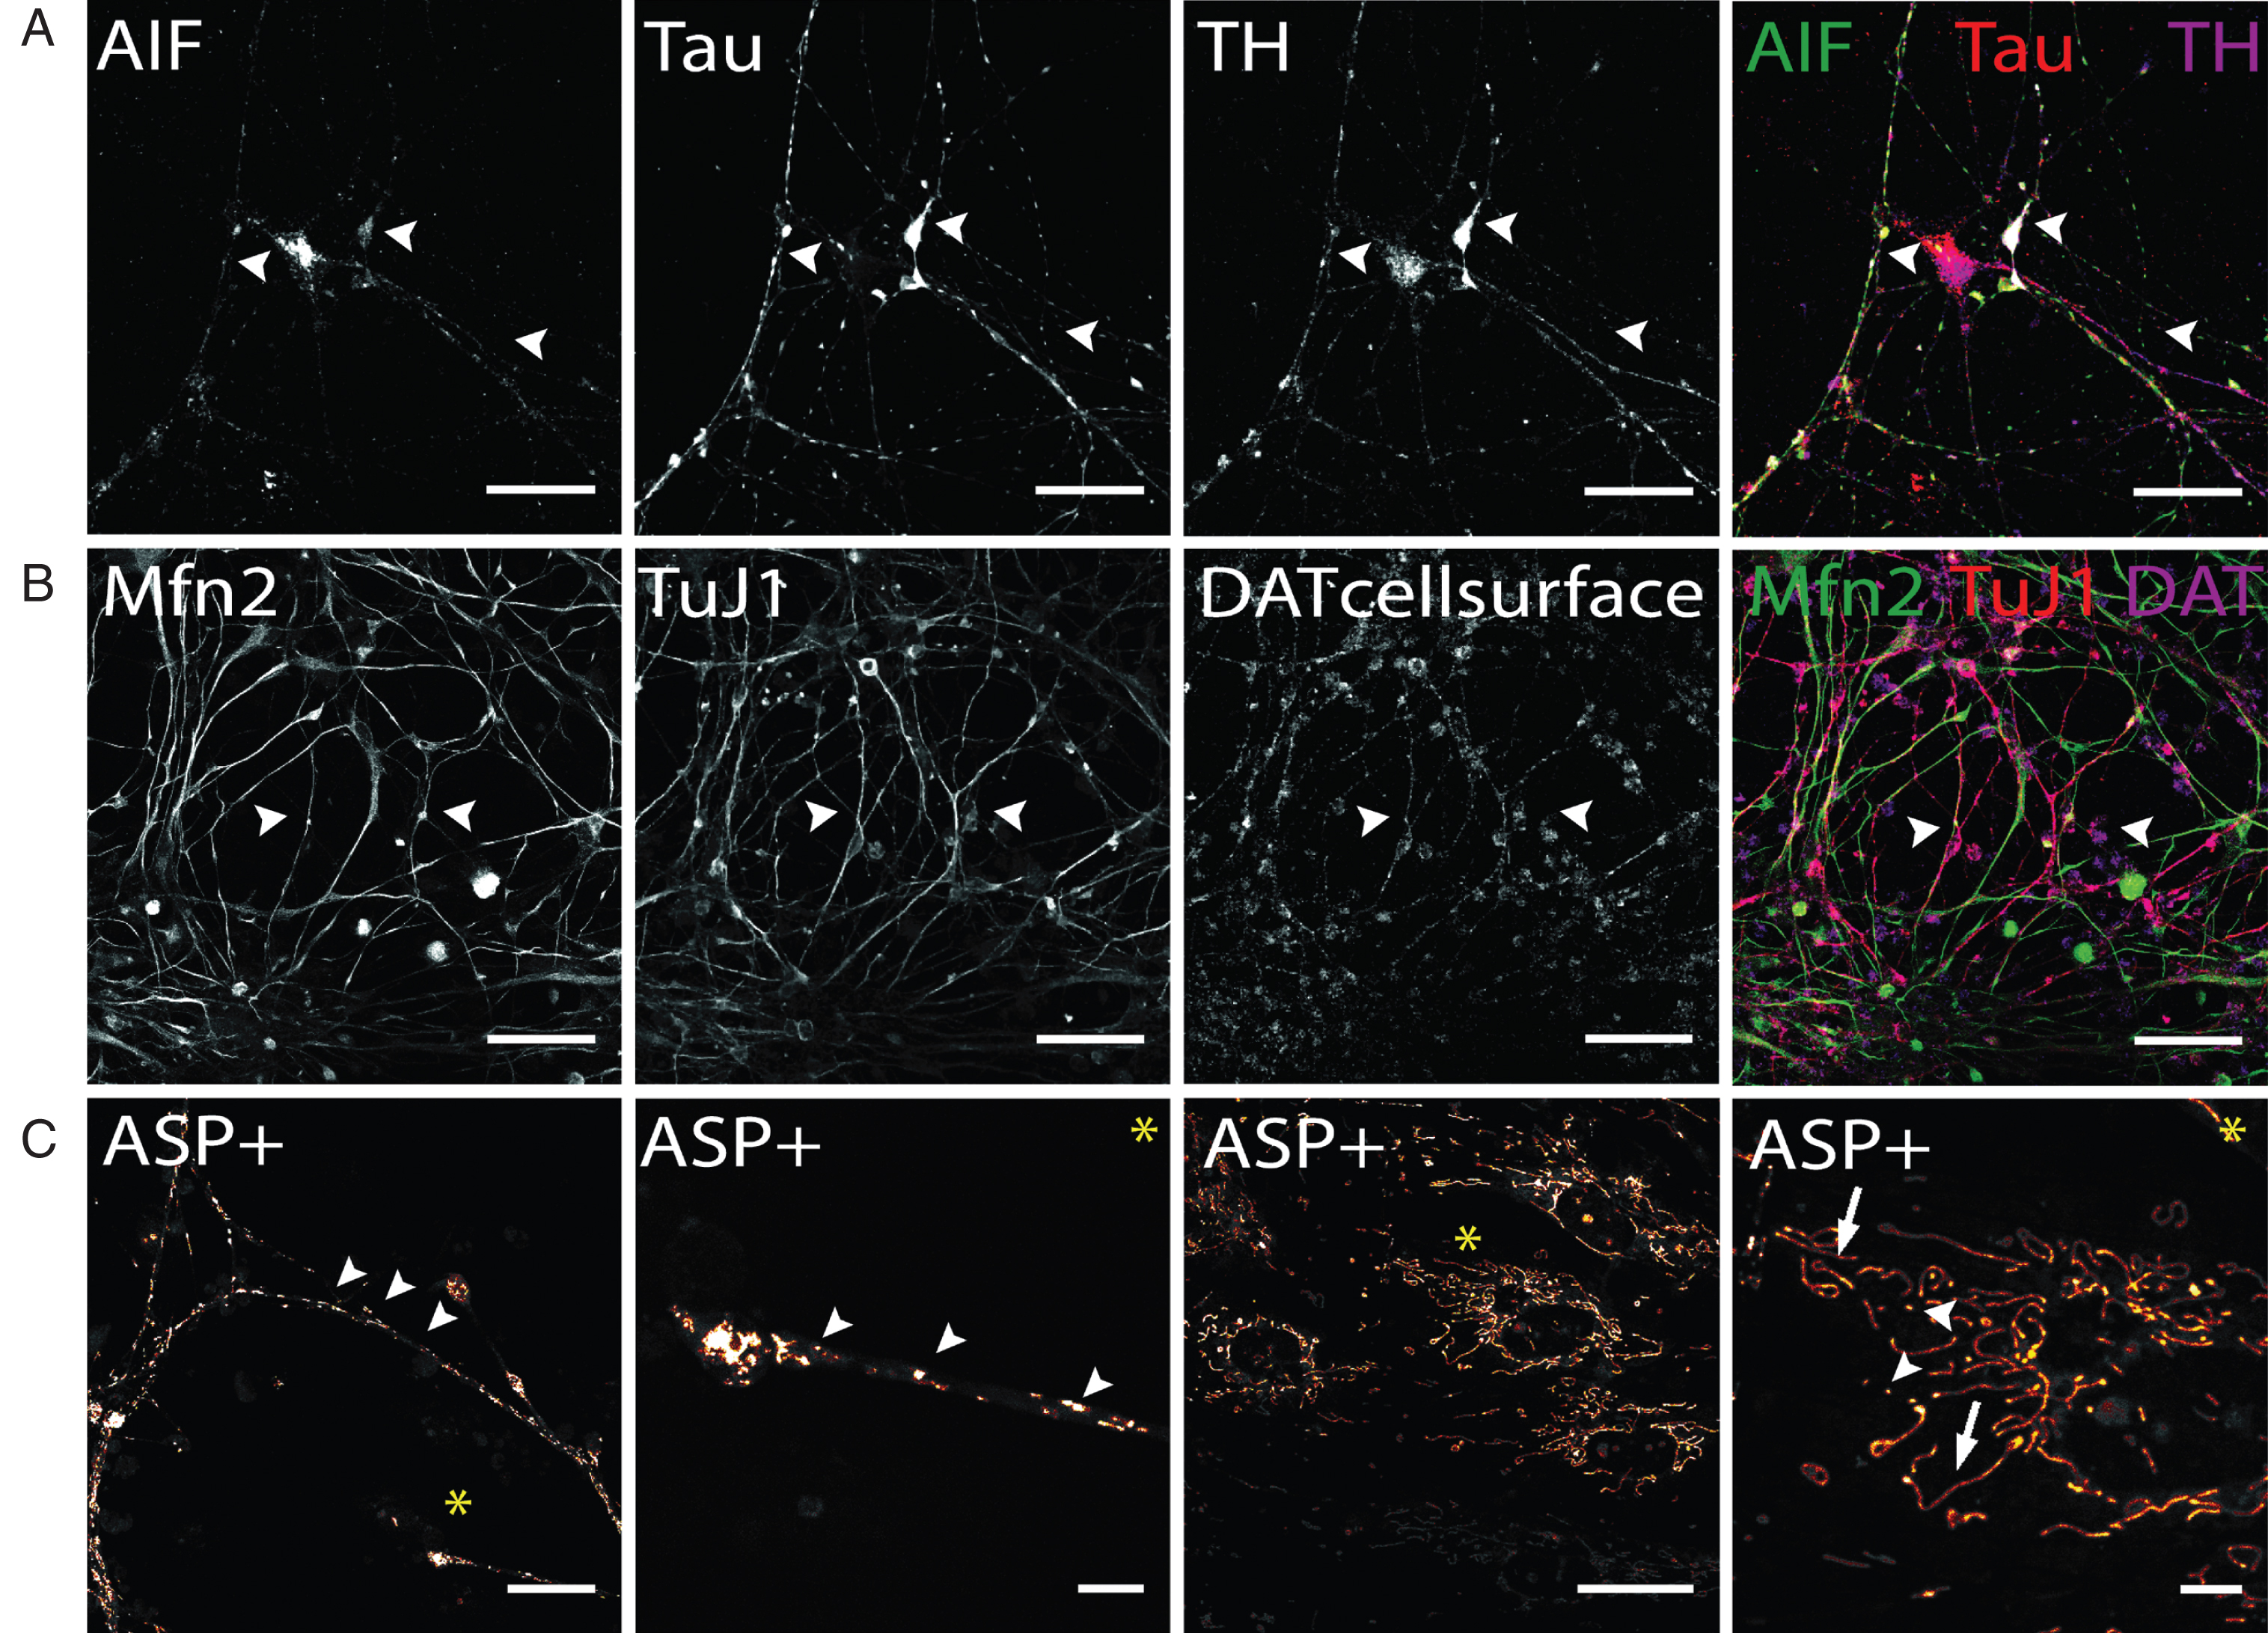 Immunocytochemical analysis of mitochondria distribution in hiPS cell-derived DA neurons and DAT specific uptake of fluorescent dye ASP+. (A) Immunostaining of mitochondrial intermembrane protein AIF in dopaminergic neurons after 50 days of terminal differentiation. AIF (green) is found to be present in cell soma and neurites (arrow heads). Dopaminergic neurons can be identified by co-localized signals of Tau (red) and TH (magenta). Scale bar: 50μm. (B) Mitochondrial fusion protein Mfn2 (green) can be visualized by immuno-cytochemistry and is evenly distributed throughout cells. Since not only neuronal cells are positively stained for Mfn2, co-staining with neuronal marker (here: TuJ1, red) and dopaminergic marker DAT was applied to identify Mfn-signals exhibited by DA neurons. Scale bar: 50μm. (C) Live cell imaging experiments in hiPS cell-derived DA neurons show DA-specific uptake of fluorescent ASP+ dye into neurons and accumulation in mitochondria. Zoom images show distribution of mitochondria along neurites and neurite endings, with mitochondrial morphology being round and punctual (arrow heads), whereas mitochondria located in cell somas are more elongated (arrows). Scale bar: 25μm, Zoom images: 5μm.